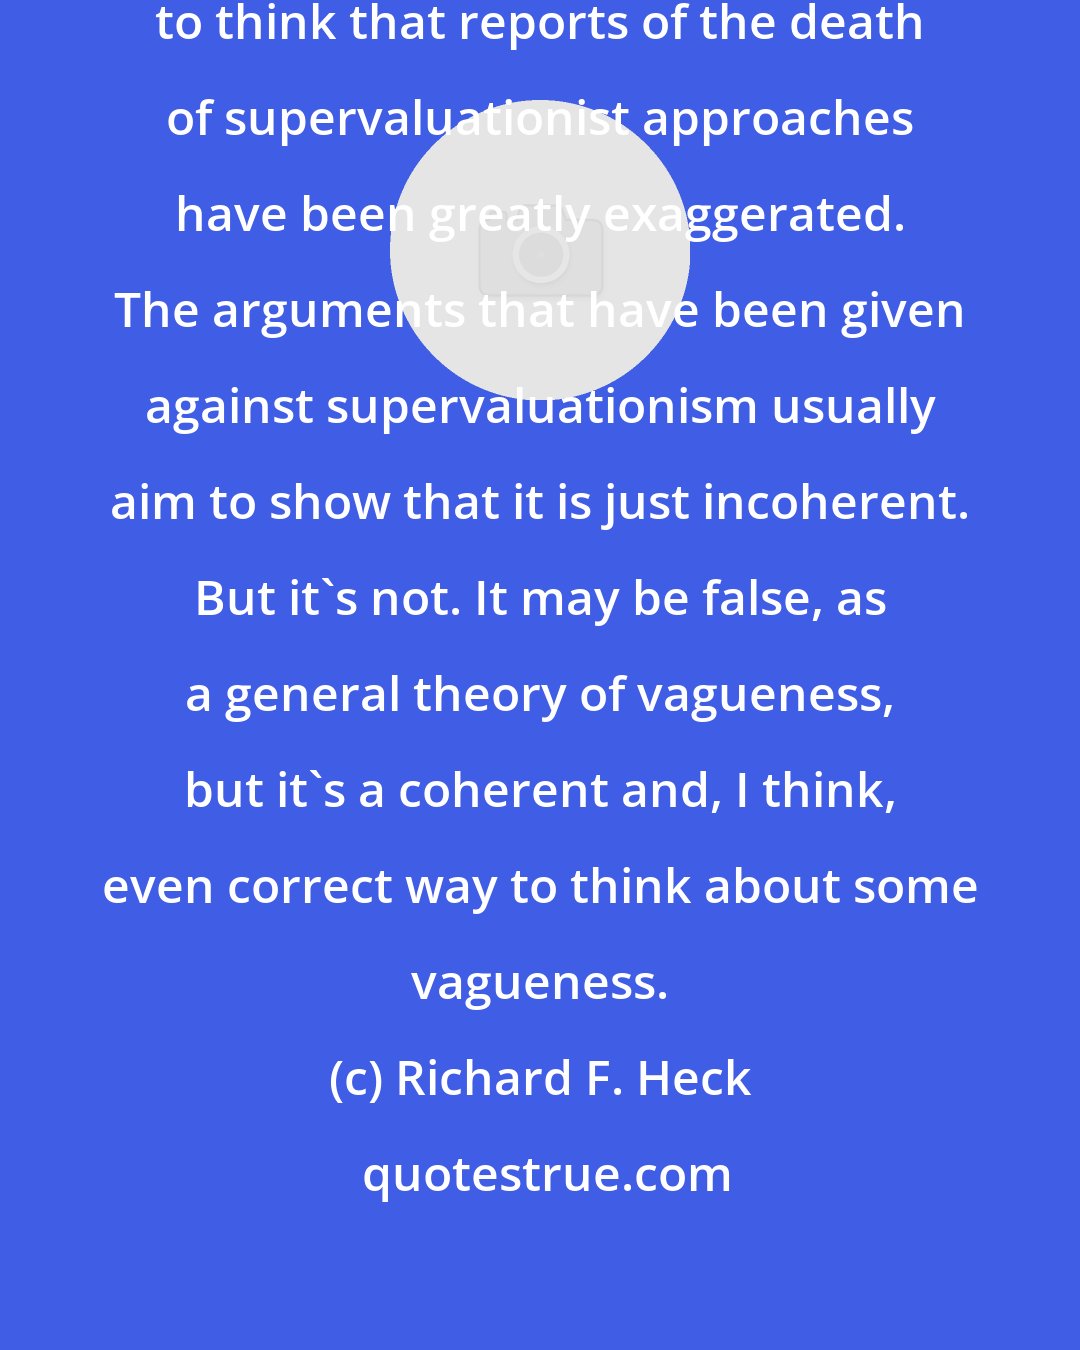 Richard F. Heck: To borrow from Mark Twain, I tend to think that reports of the death of supervaluationist approaches have been greatly exaggerated. The arguments that have been given against supervaluationism usually aim to show that it is just incoherent. But it's not. It may be false, as a general theory of vagueness, but it's a coherent and, I think, even correct way to think about some vagueness.